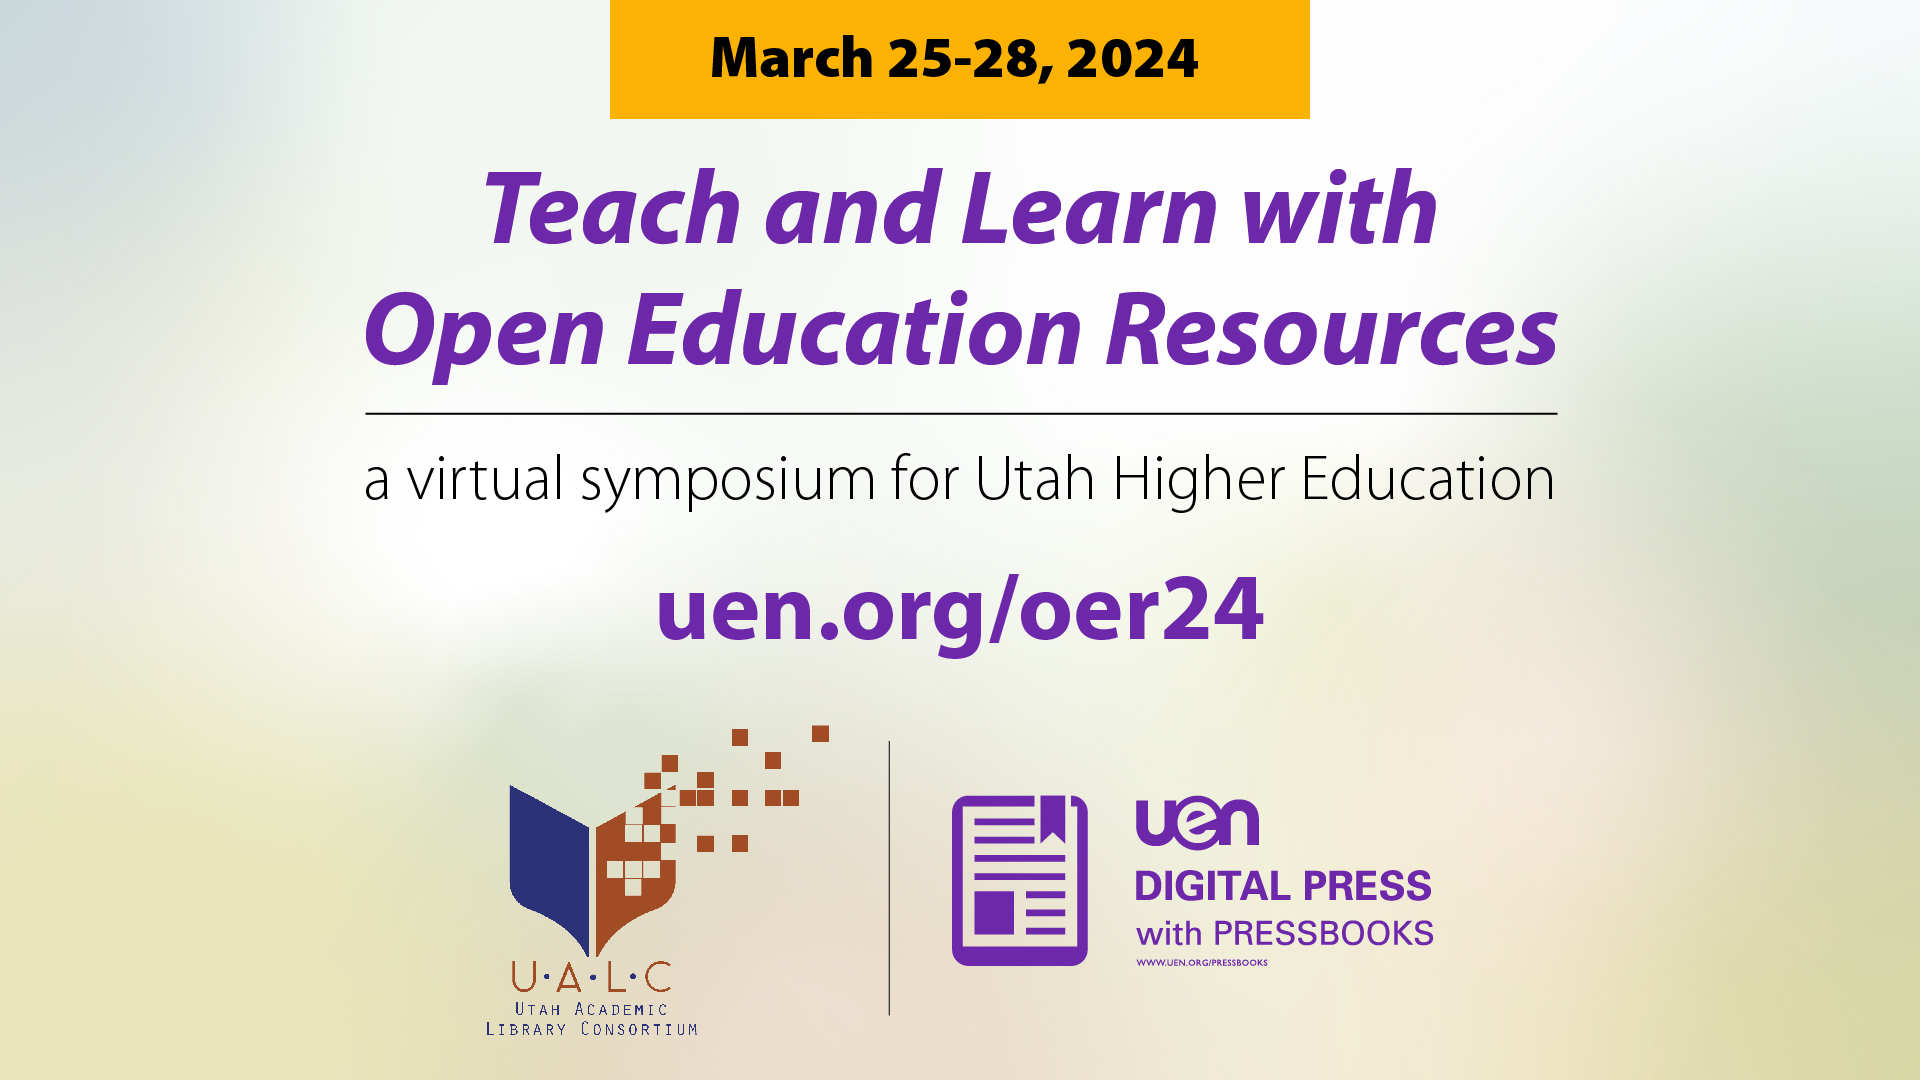 March 25-28, 2024 Teach & Learn with Open Education Resources a virtual symposium for Utah Higher Education. uen.org/oer23